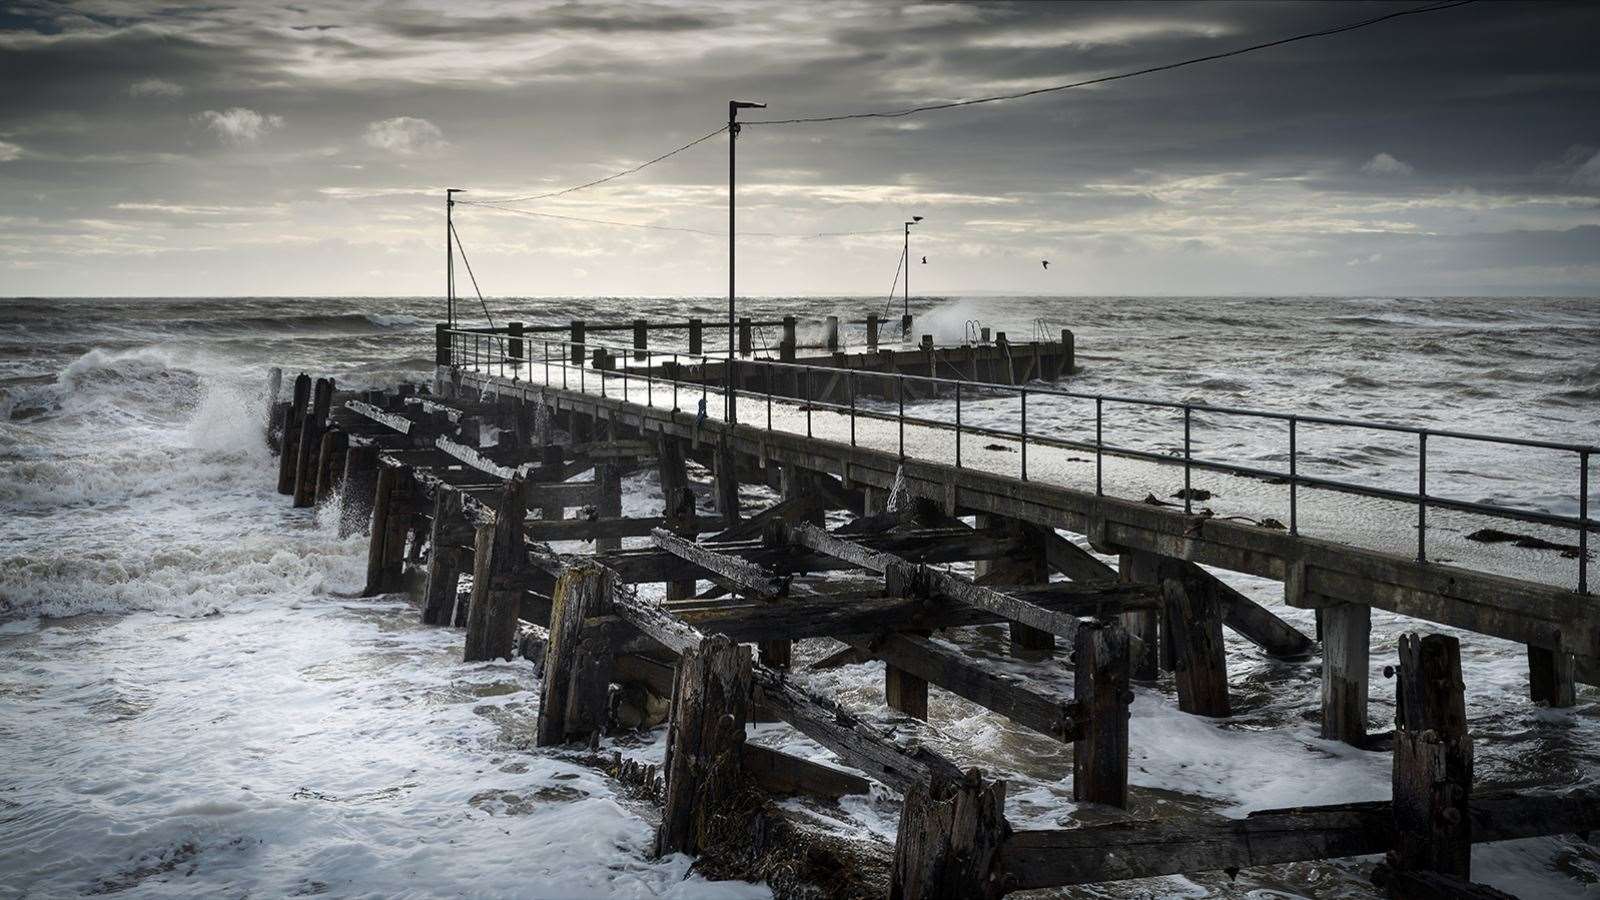 In the colour class Martin Ross came fourth with a stormy scene of his local Golspie pier.